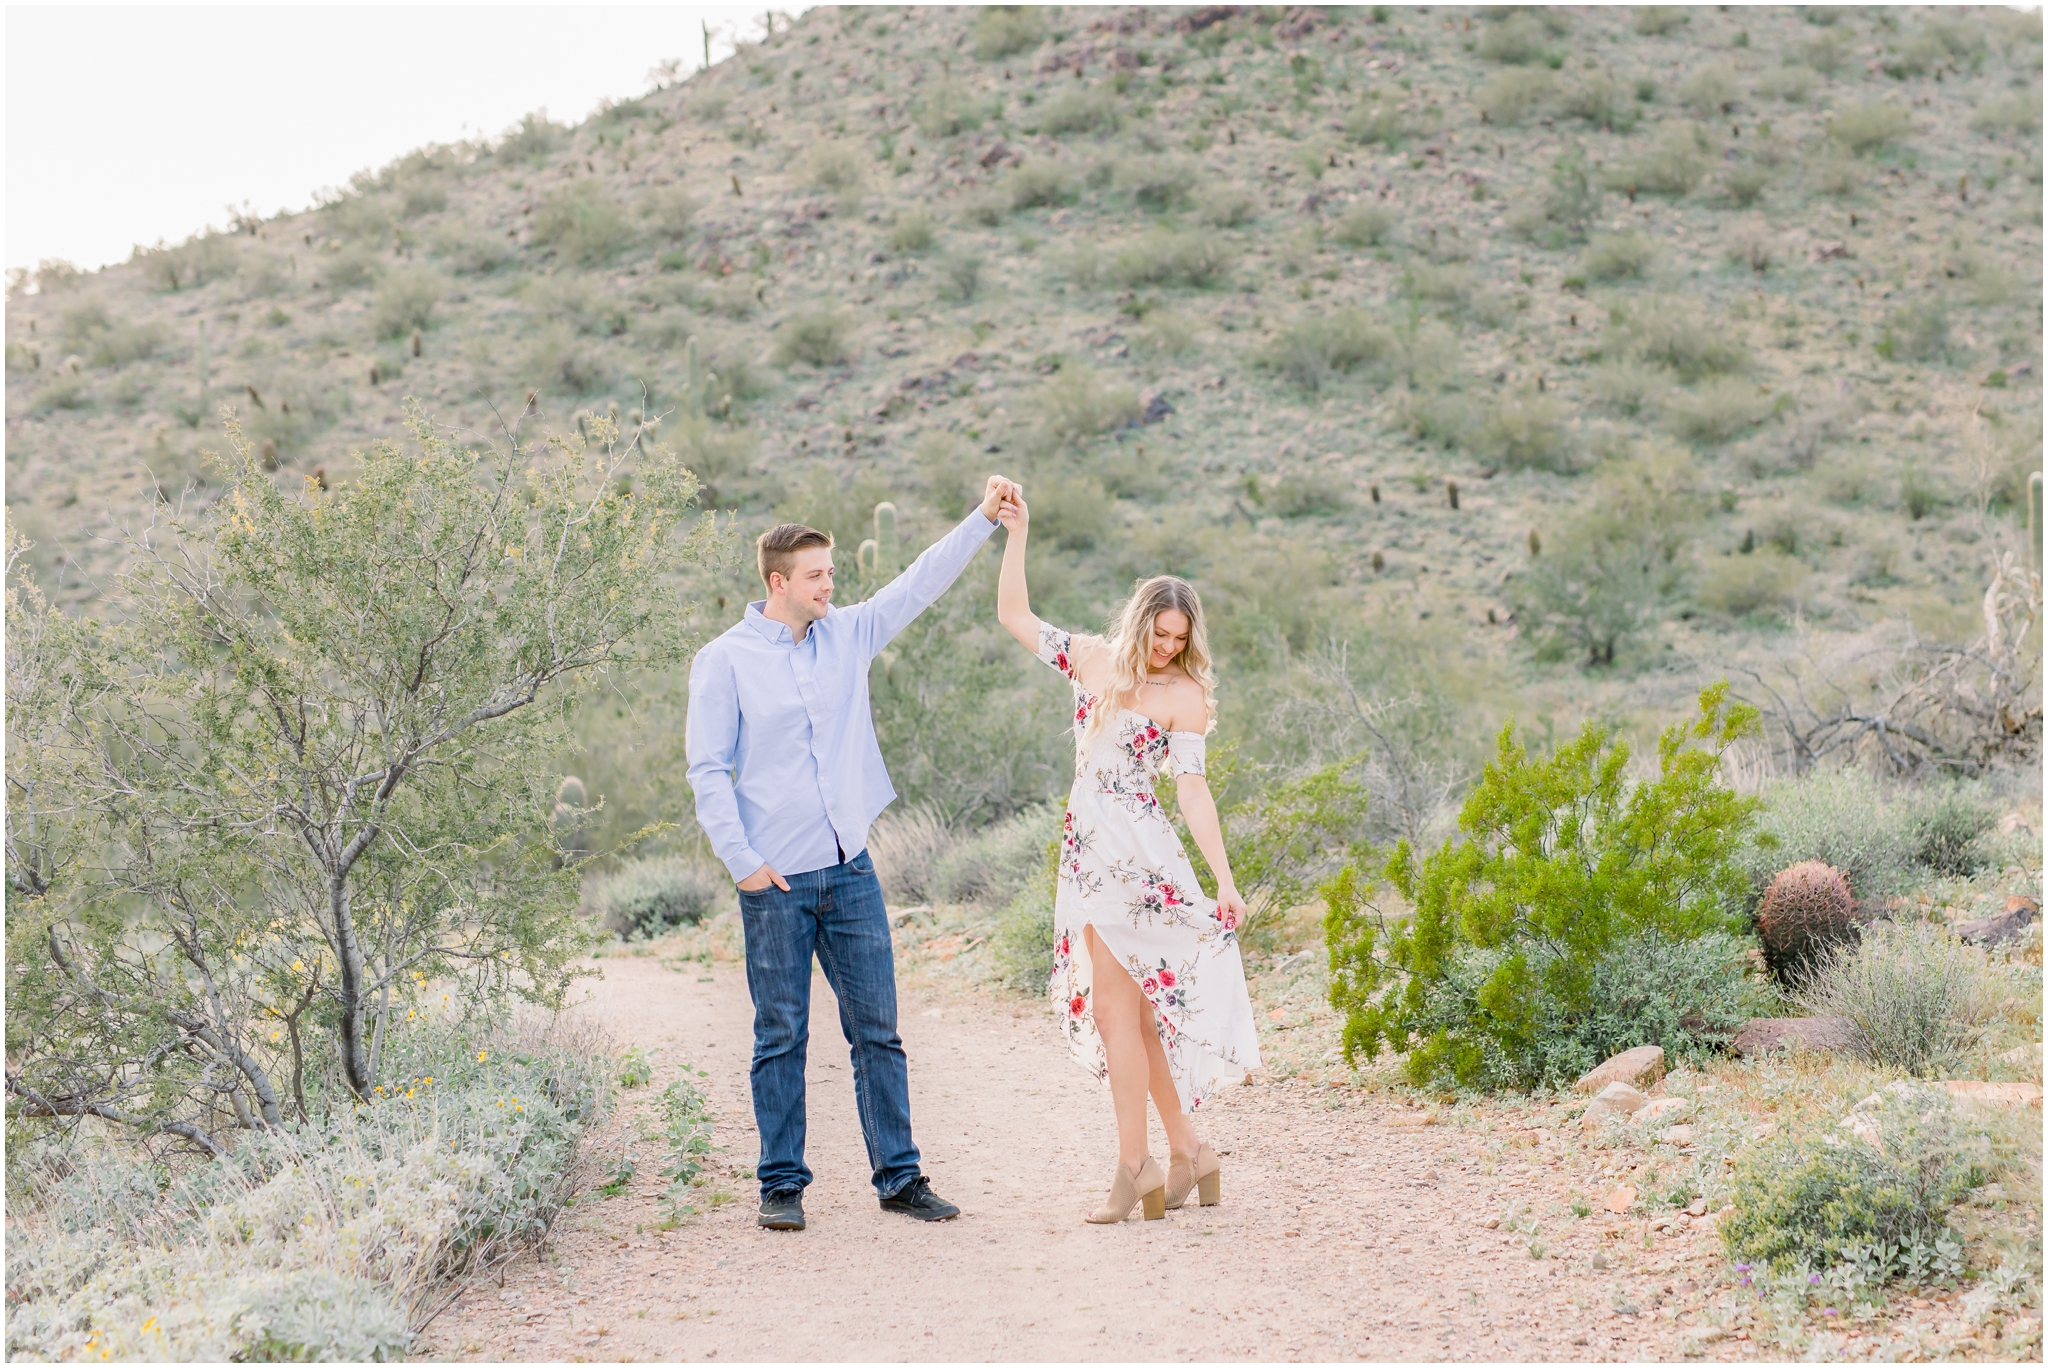 Lost Dog Trail Engagement, white floral dress, blue shirt and jeans